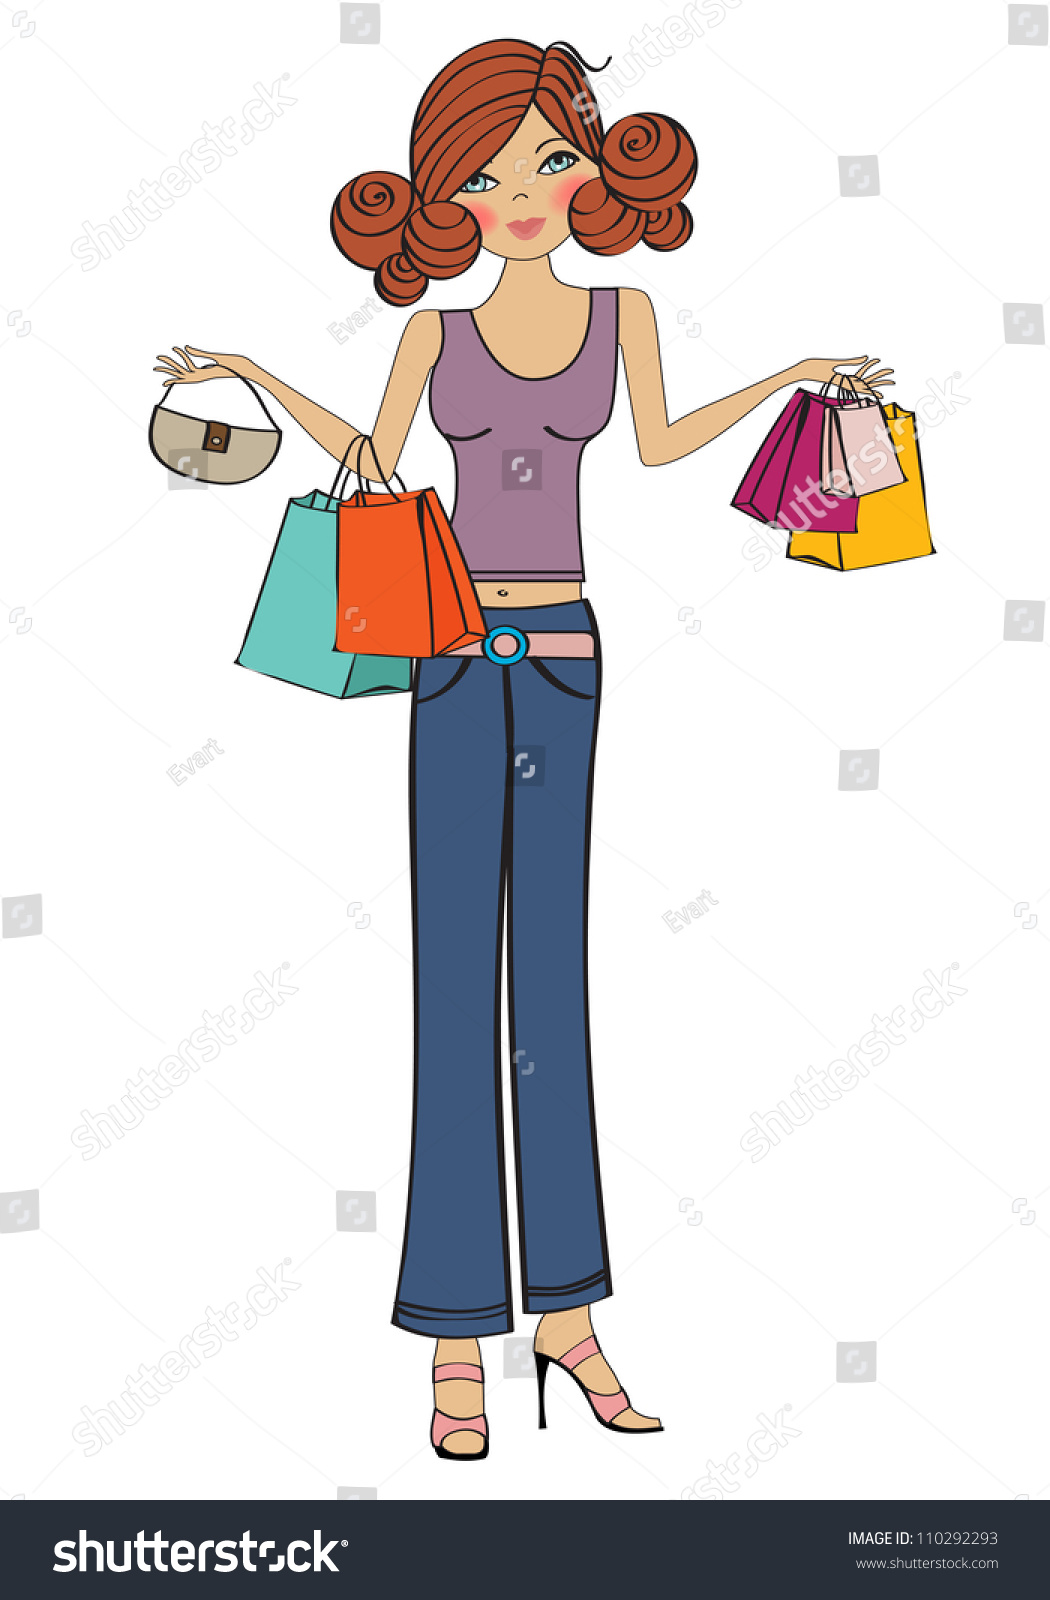 Young Girls At Shopping, Vector Illustration Isolated On White ...